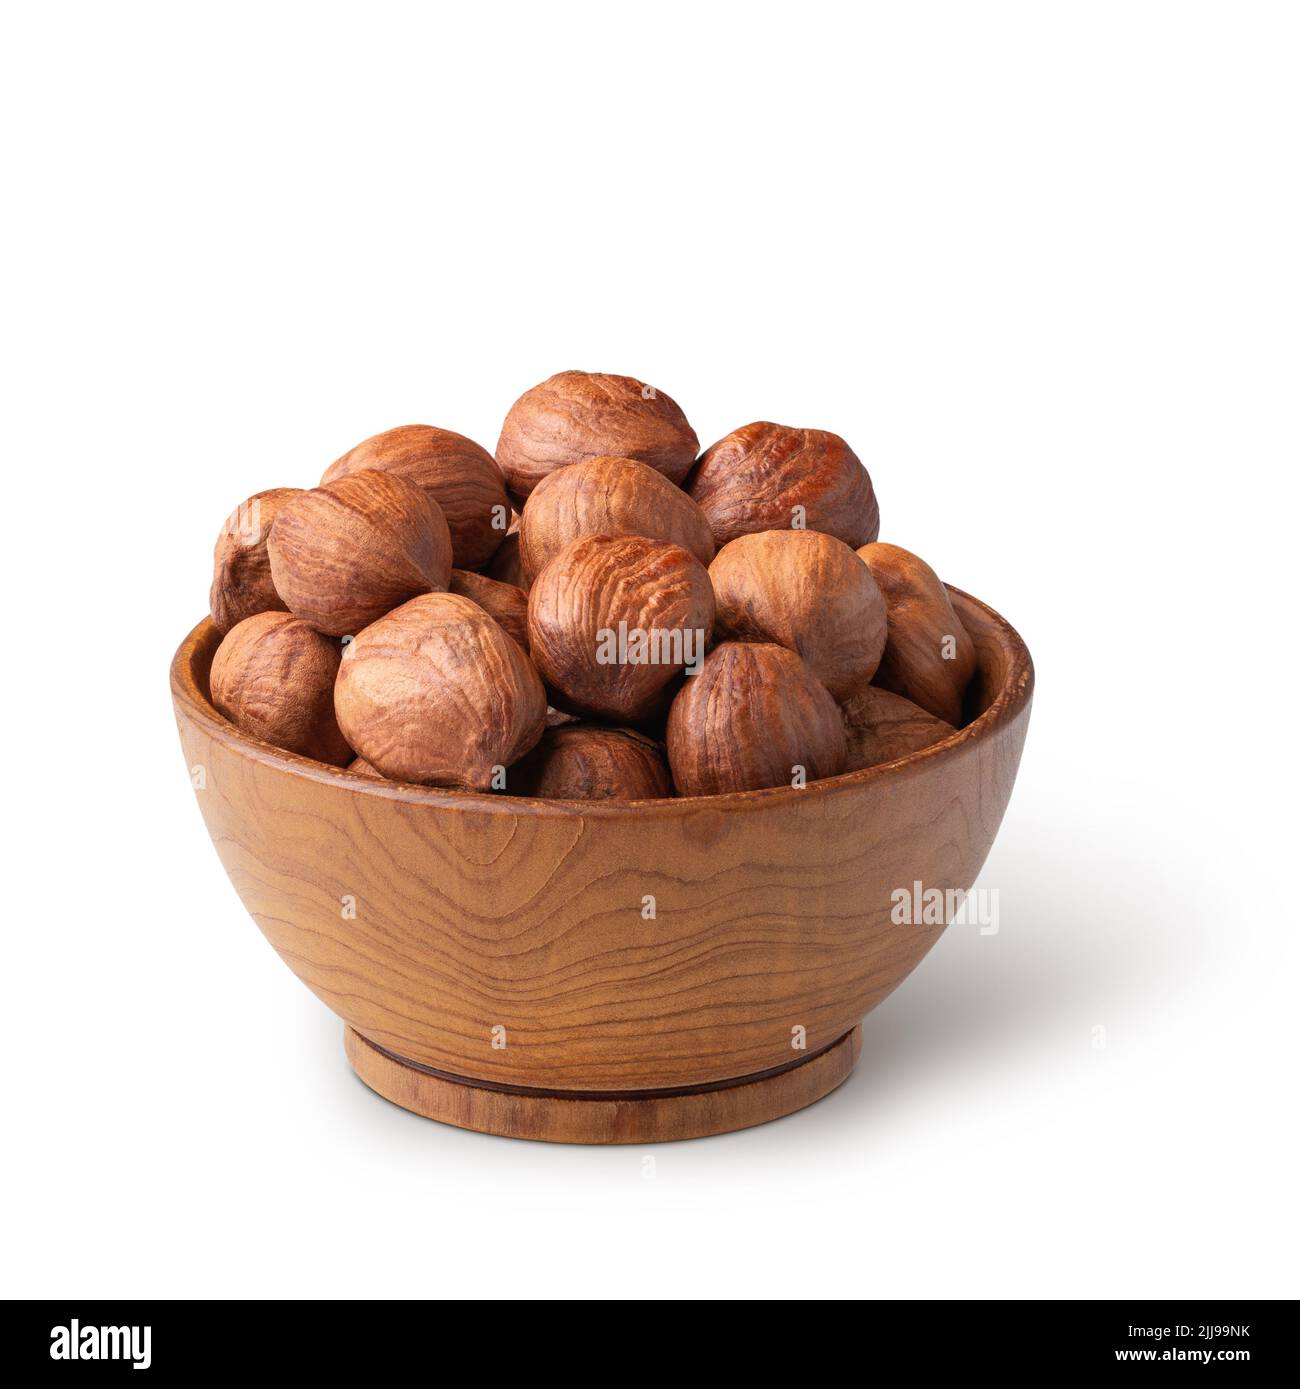 Wooden bowl full of hazelnuts isolated on white. Deep focus Stock Photo